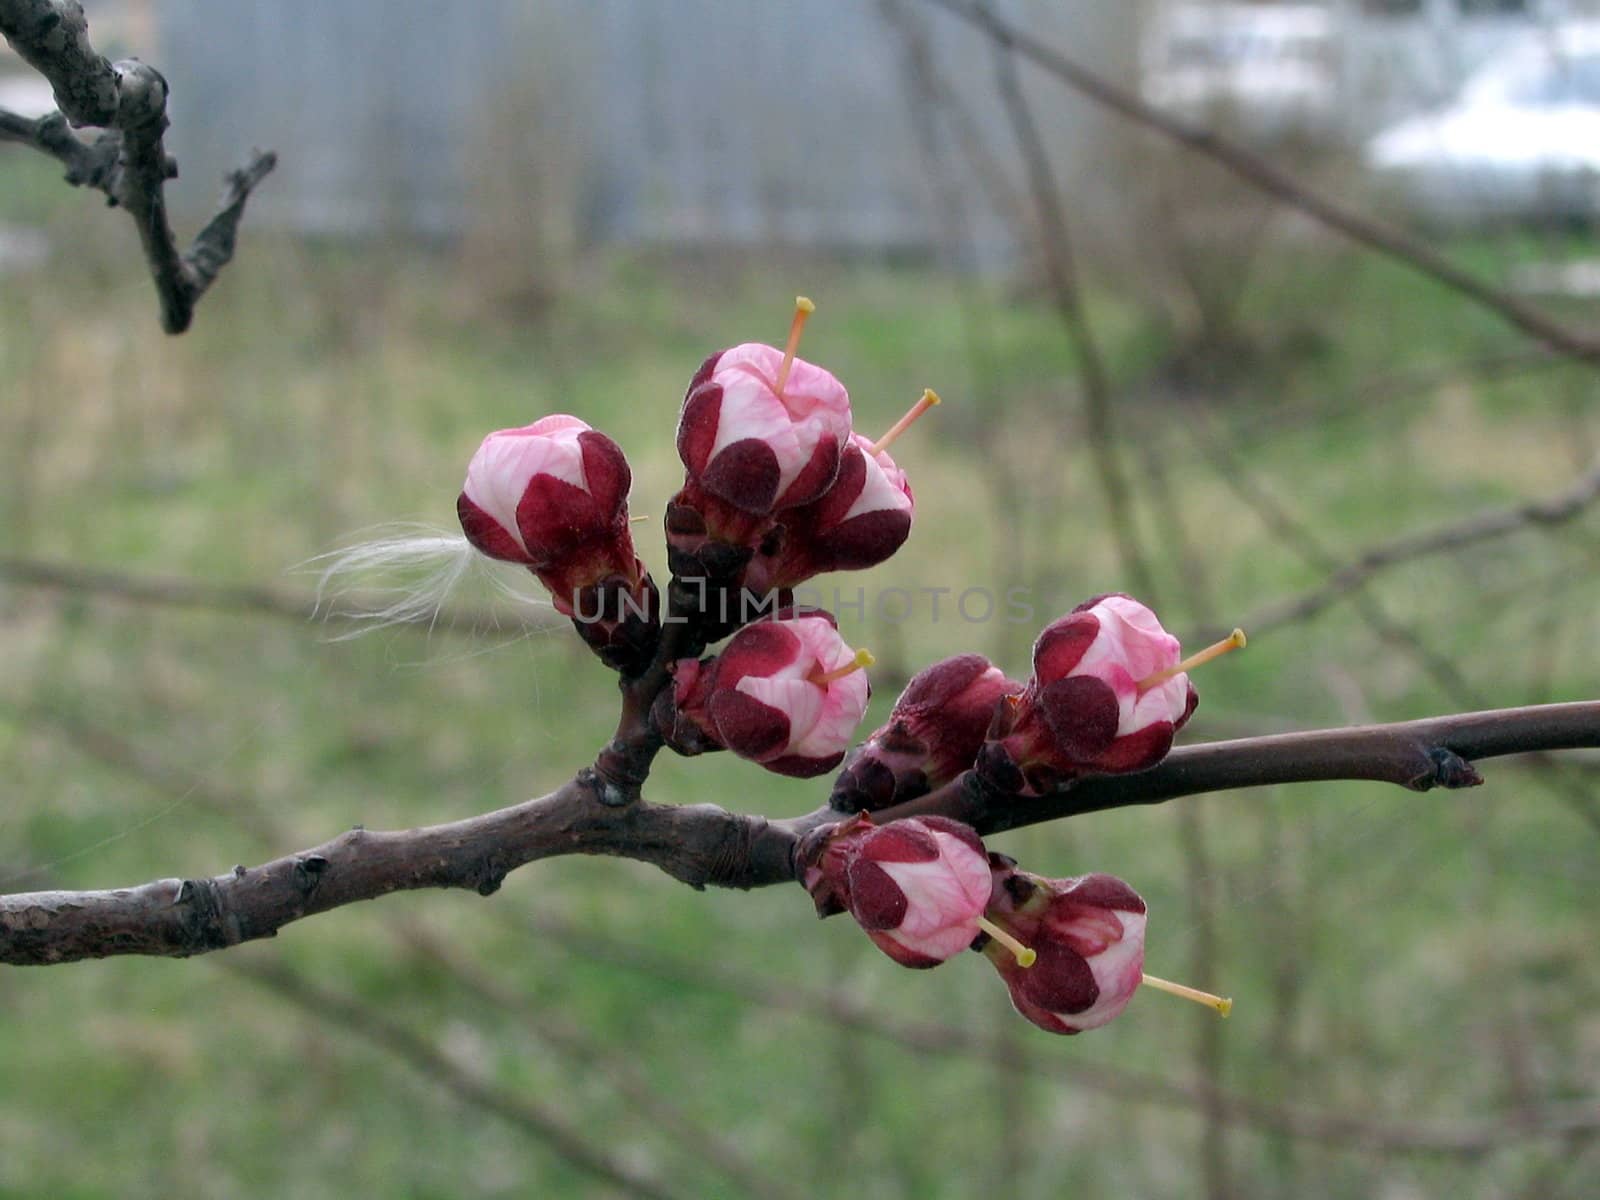 The Flowering branch of the apricot